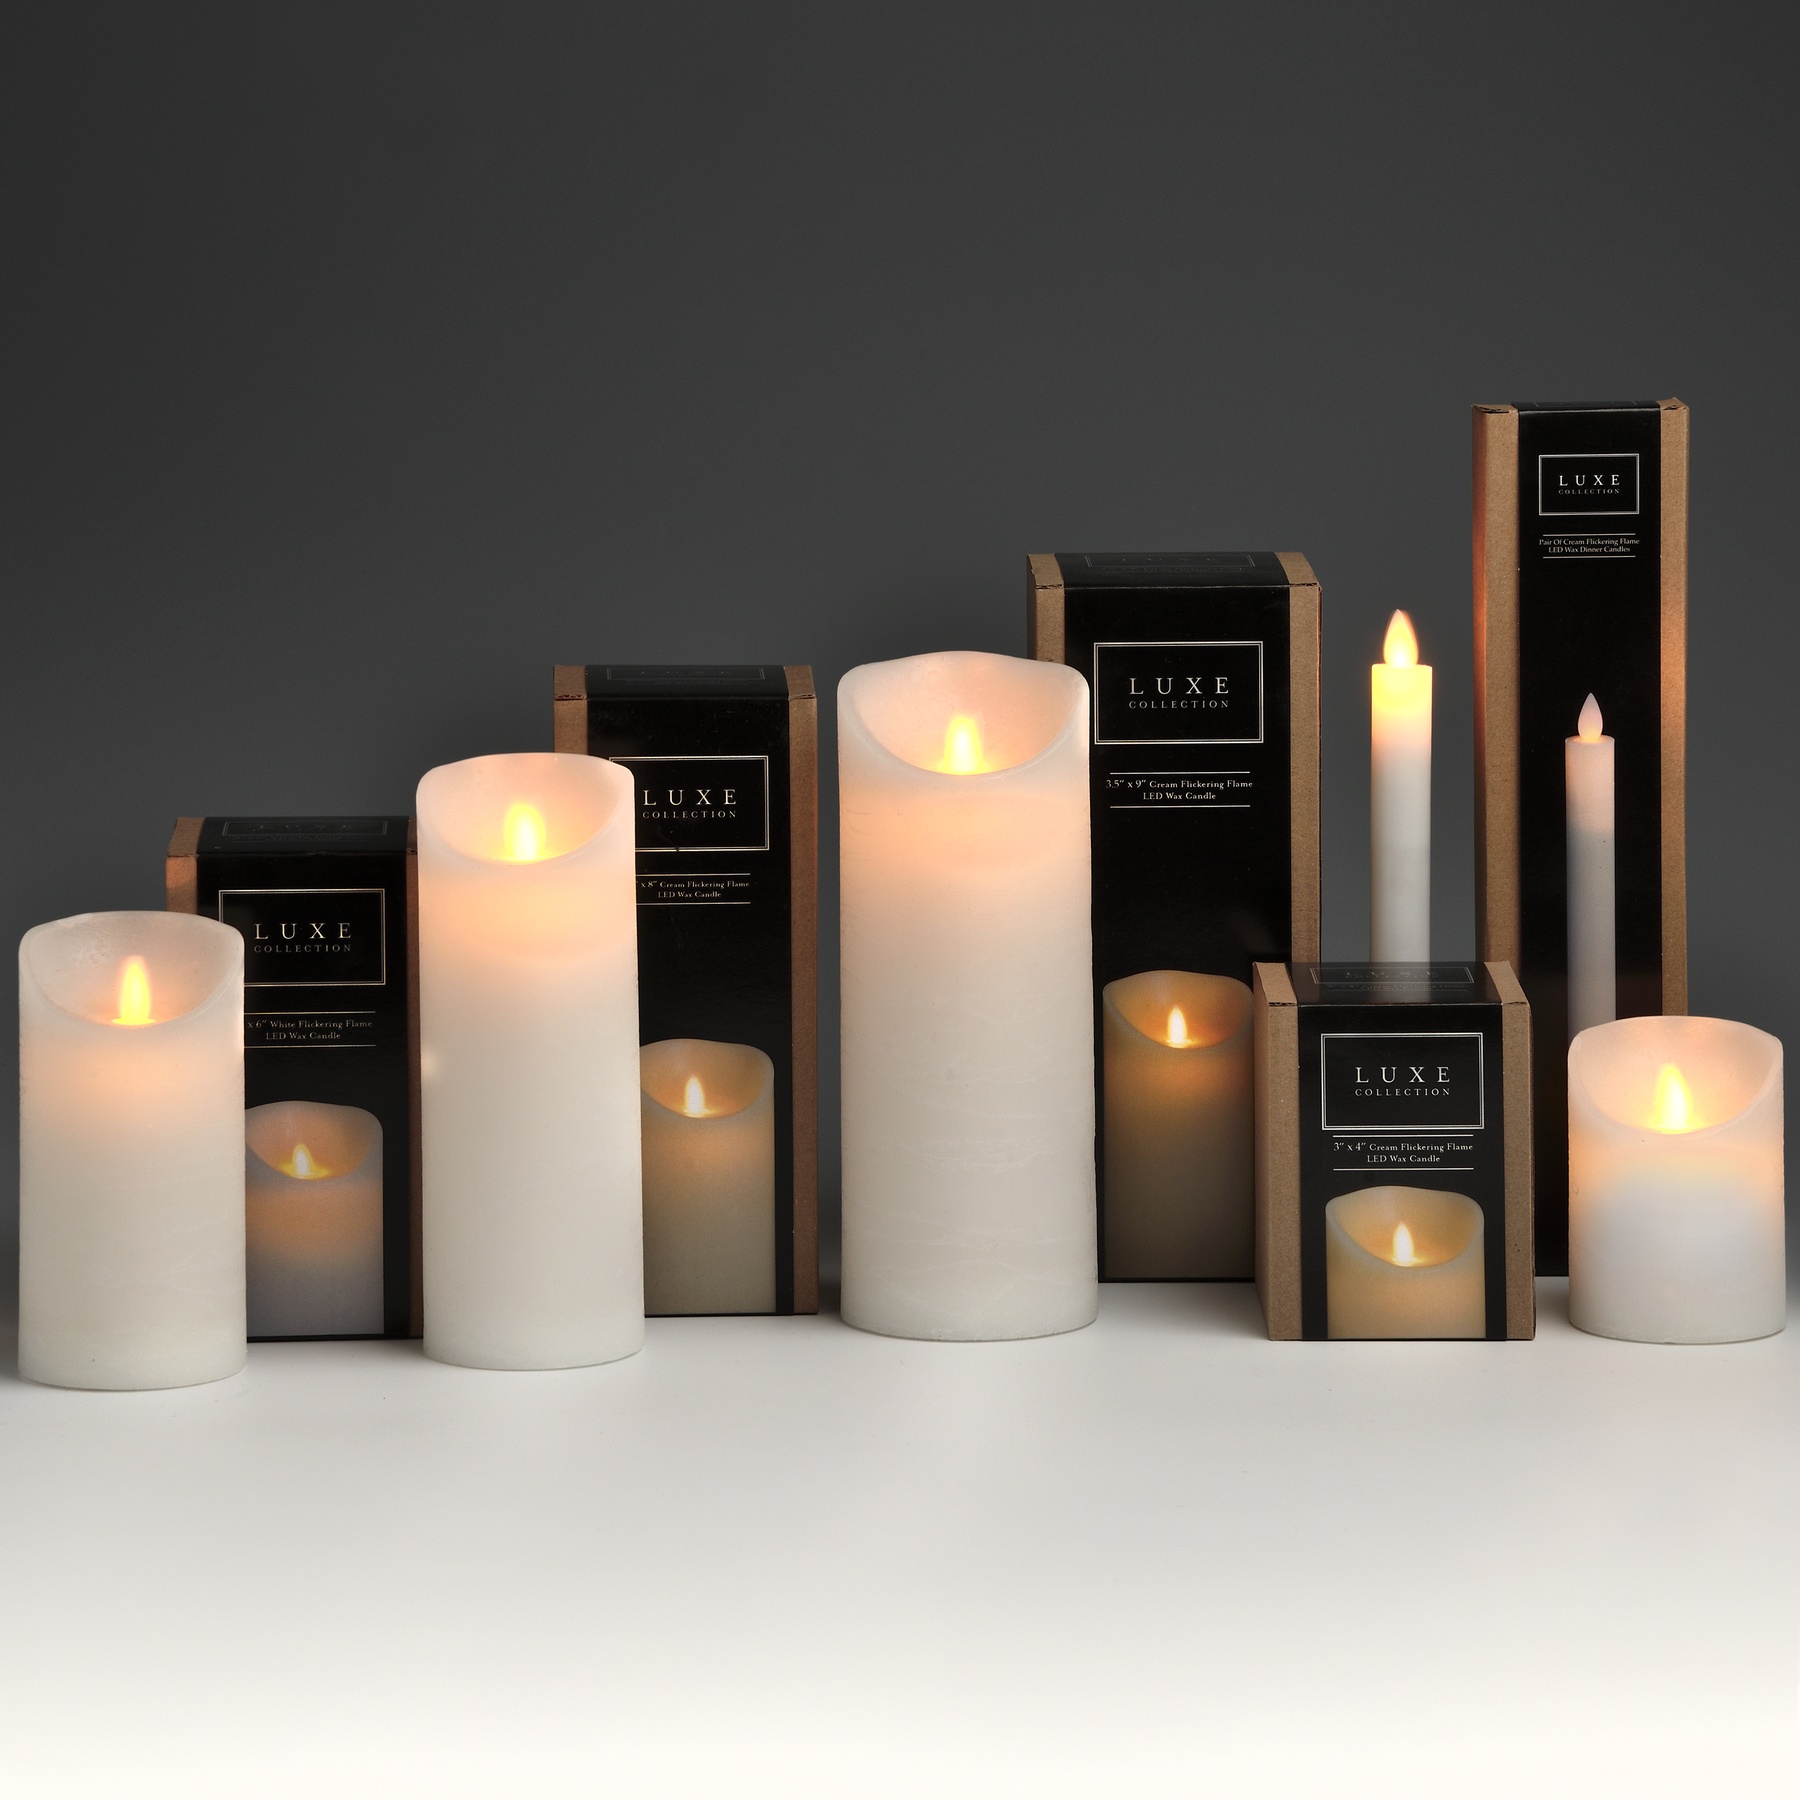 Luxe Collection 3 x 4 White Flickering Flame LED Wax Candle - Image 4